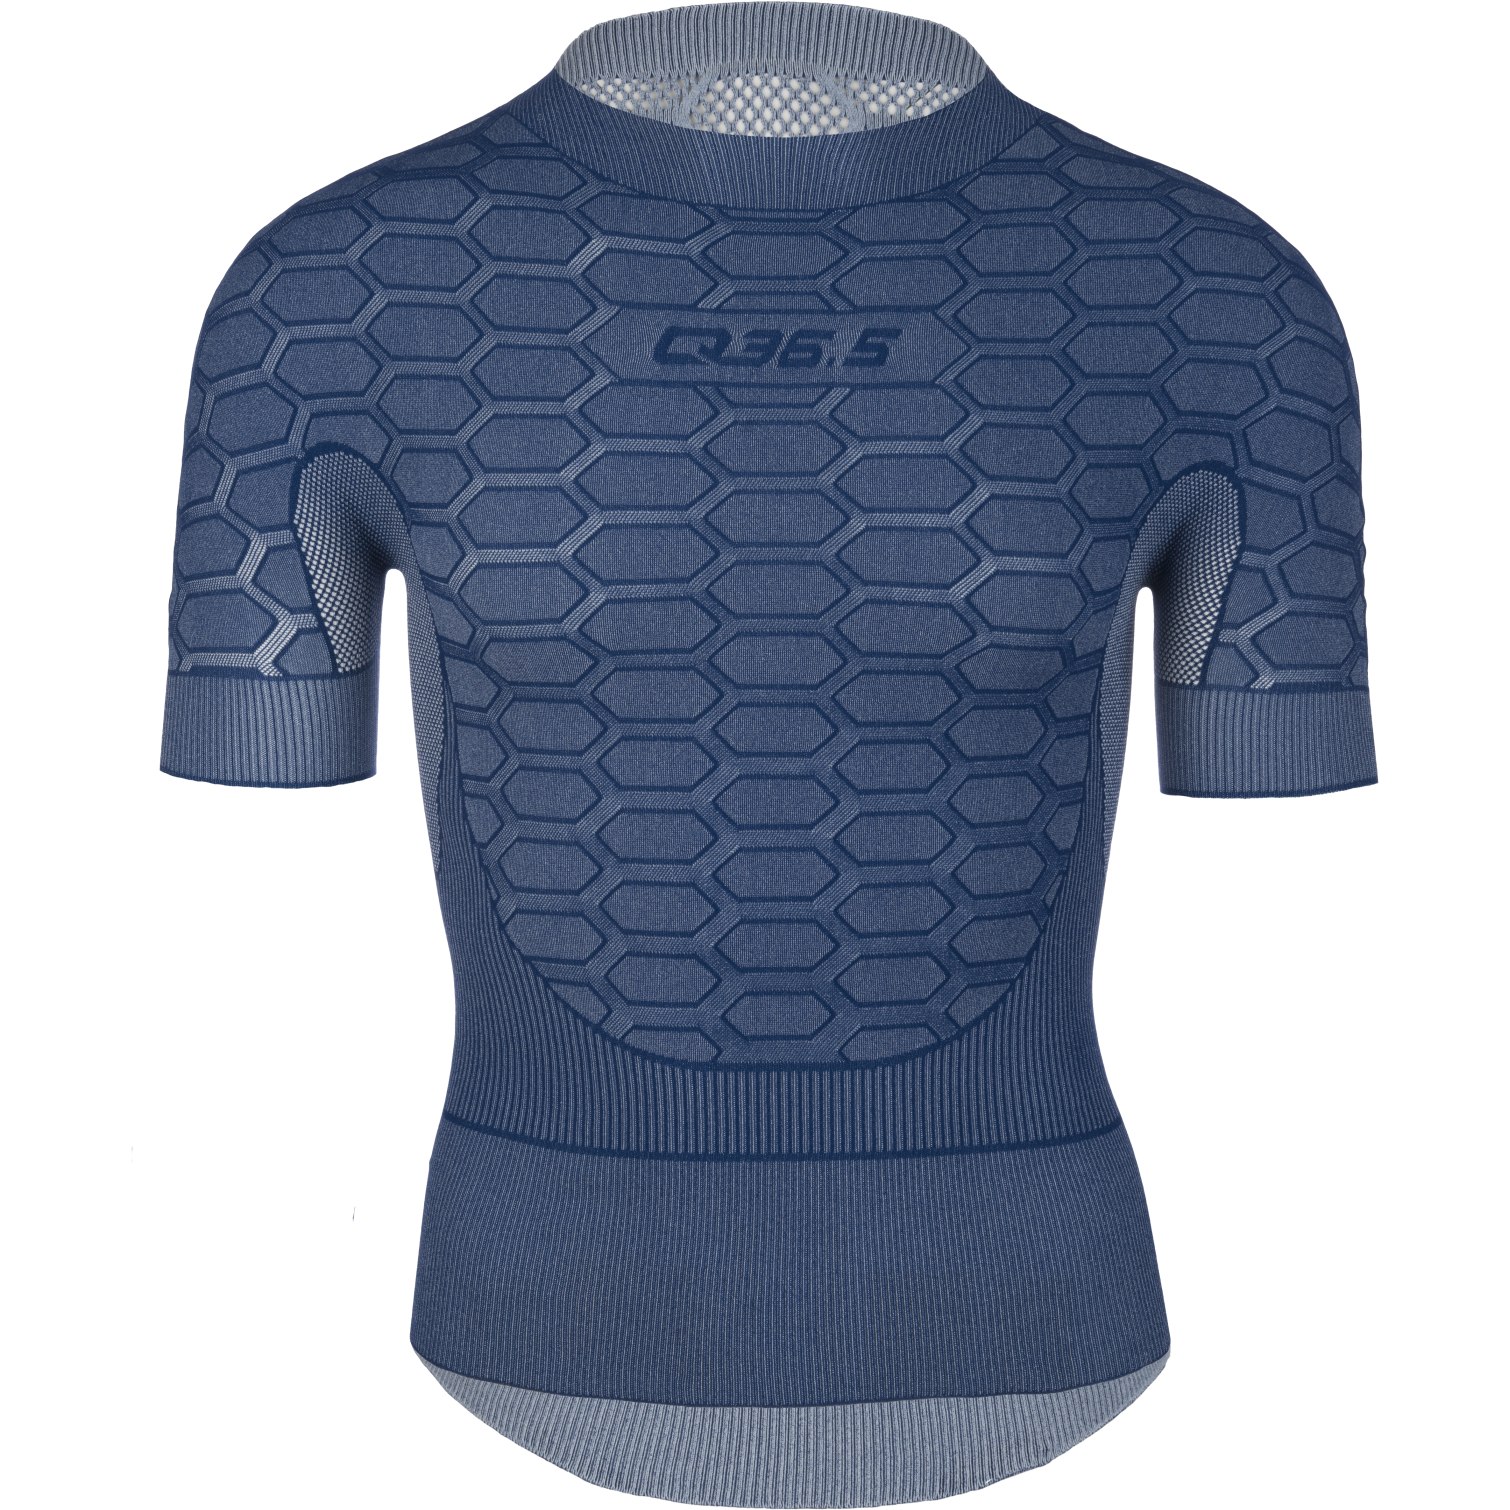 Picture of Q36.5 Base Layer 2 Short Sleeve - navy